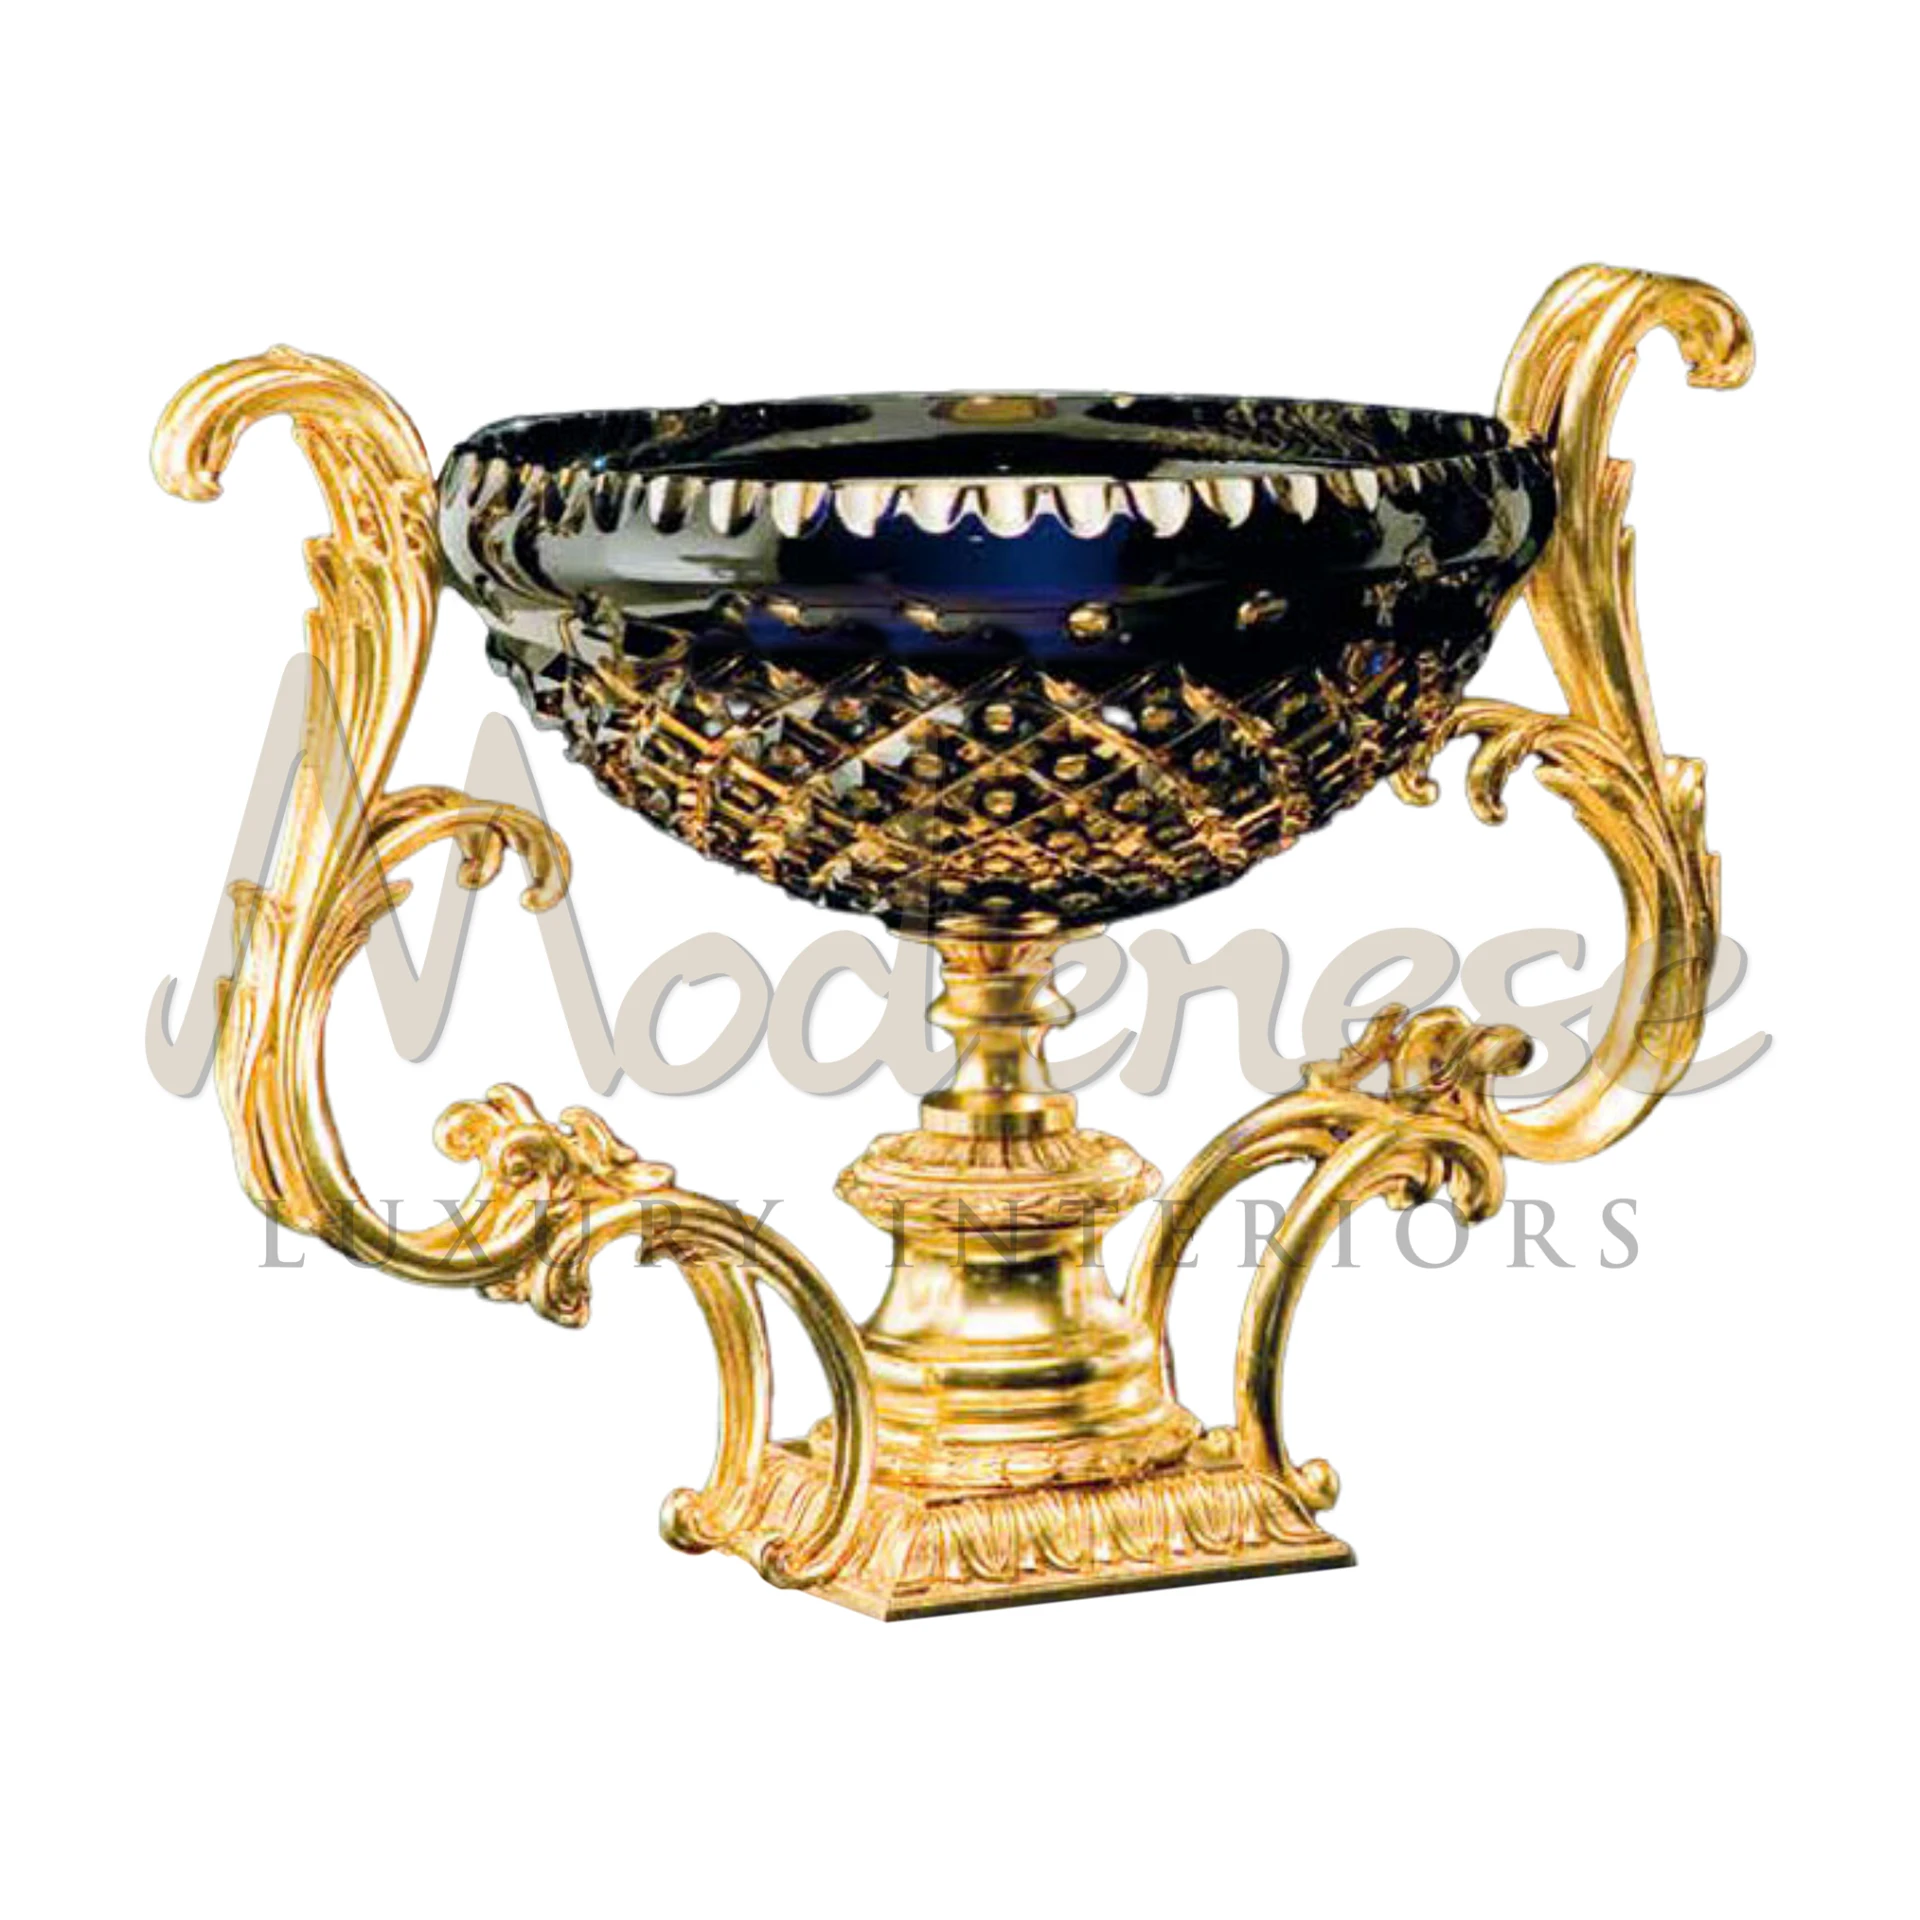 Rococo Style Luxury Bowl by Modenese, epitomizing luxury interior design with ornate detailing in glass and crystal.